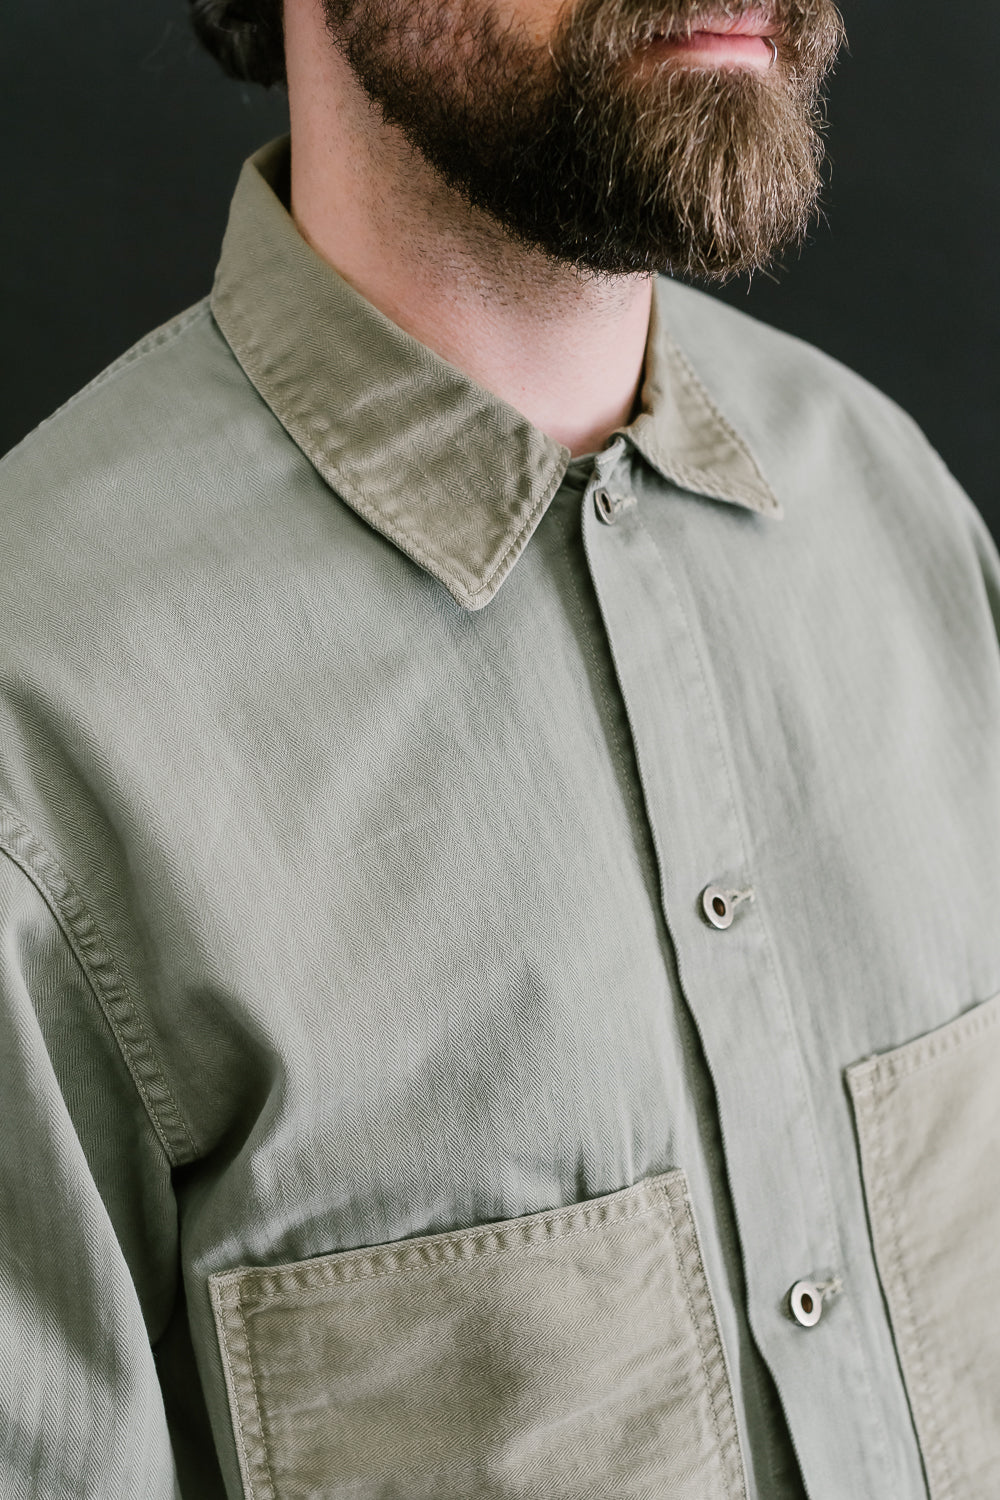 01-6120-16 - Utility Coverall Mismatched Herringbone - Washed Green